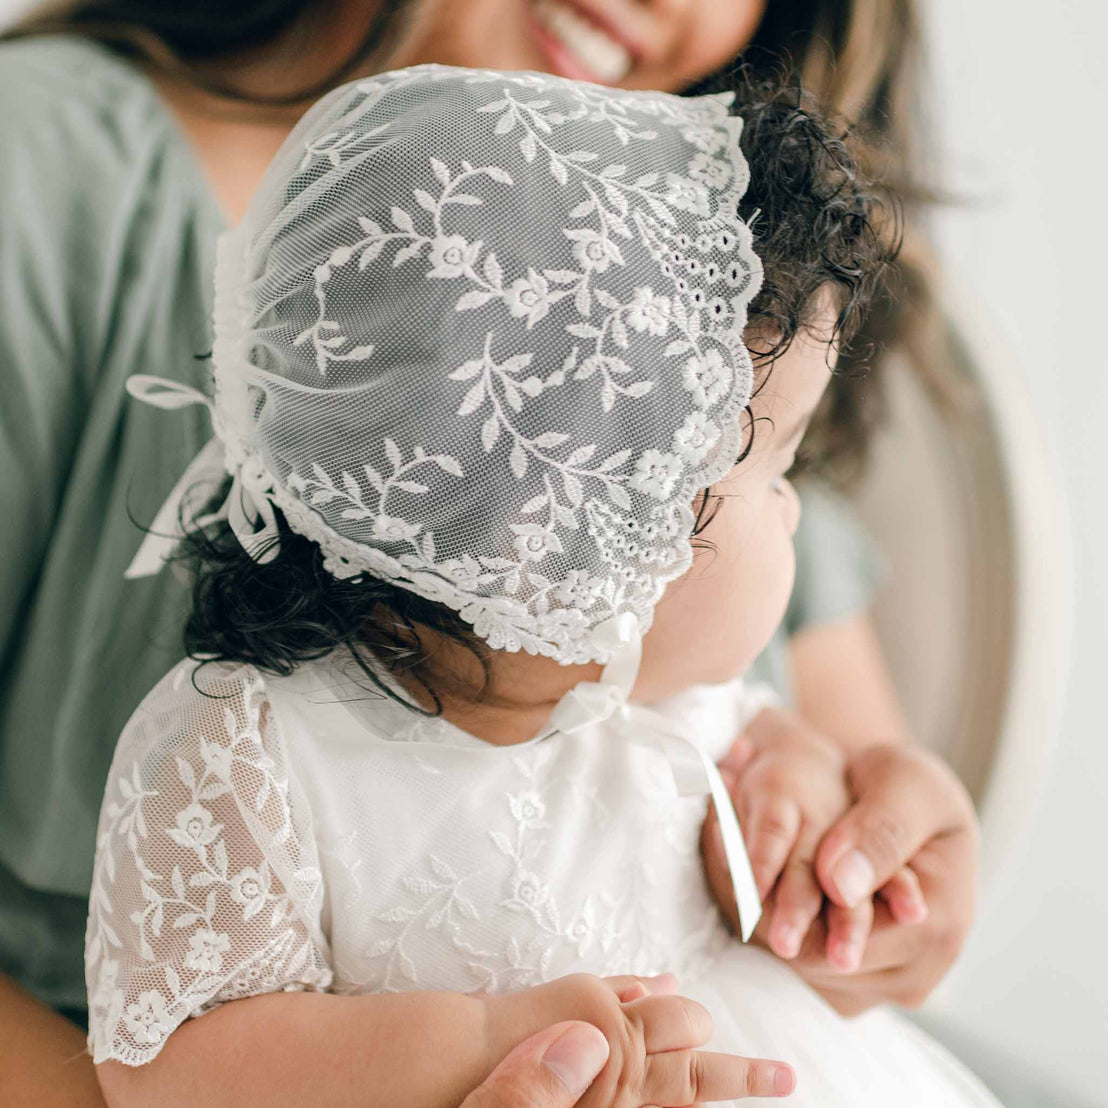 A baby wearing the Ella Lace Bonnet and the Ella Christening Gown sits in a woman's lap. The baby has curly hair and is looking to the side. The woman, wearing a green top, gently holds the baby's arm.